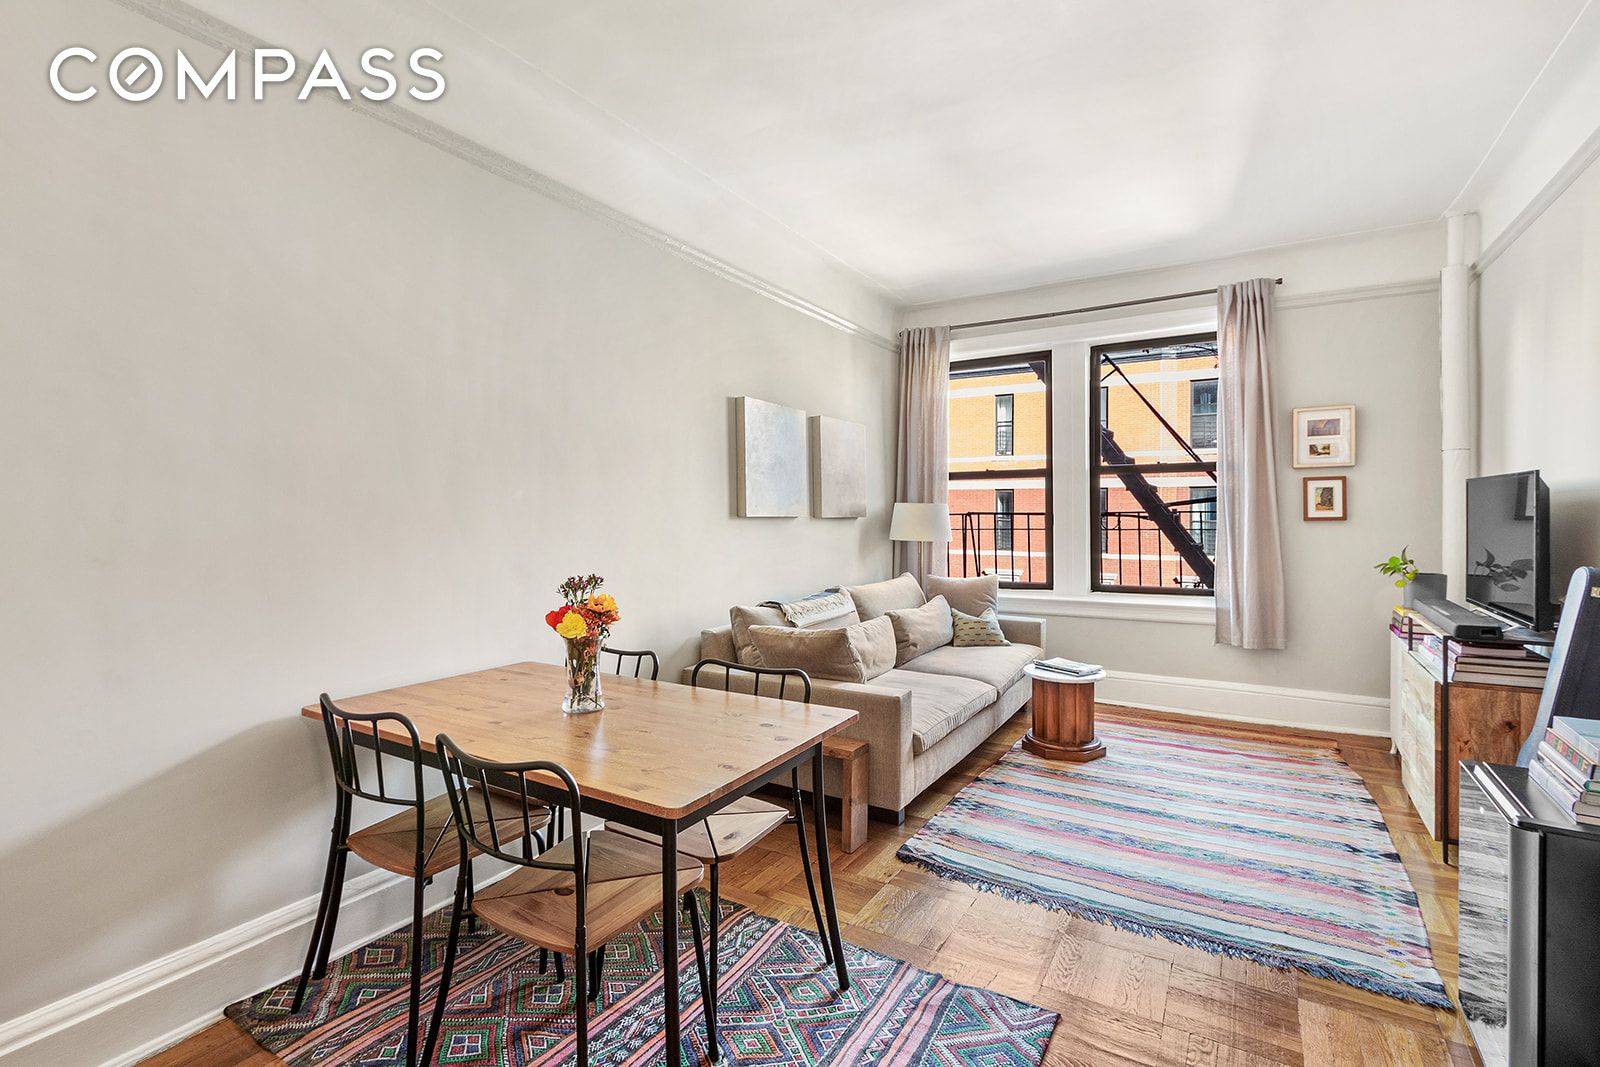 Welcome home to this spacious one bedroom apartment in the heart of Prospect Heights.